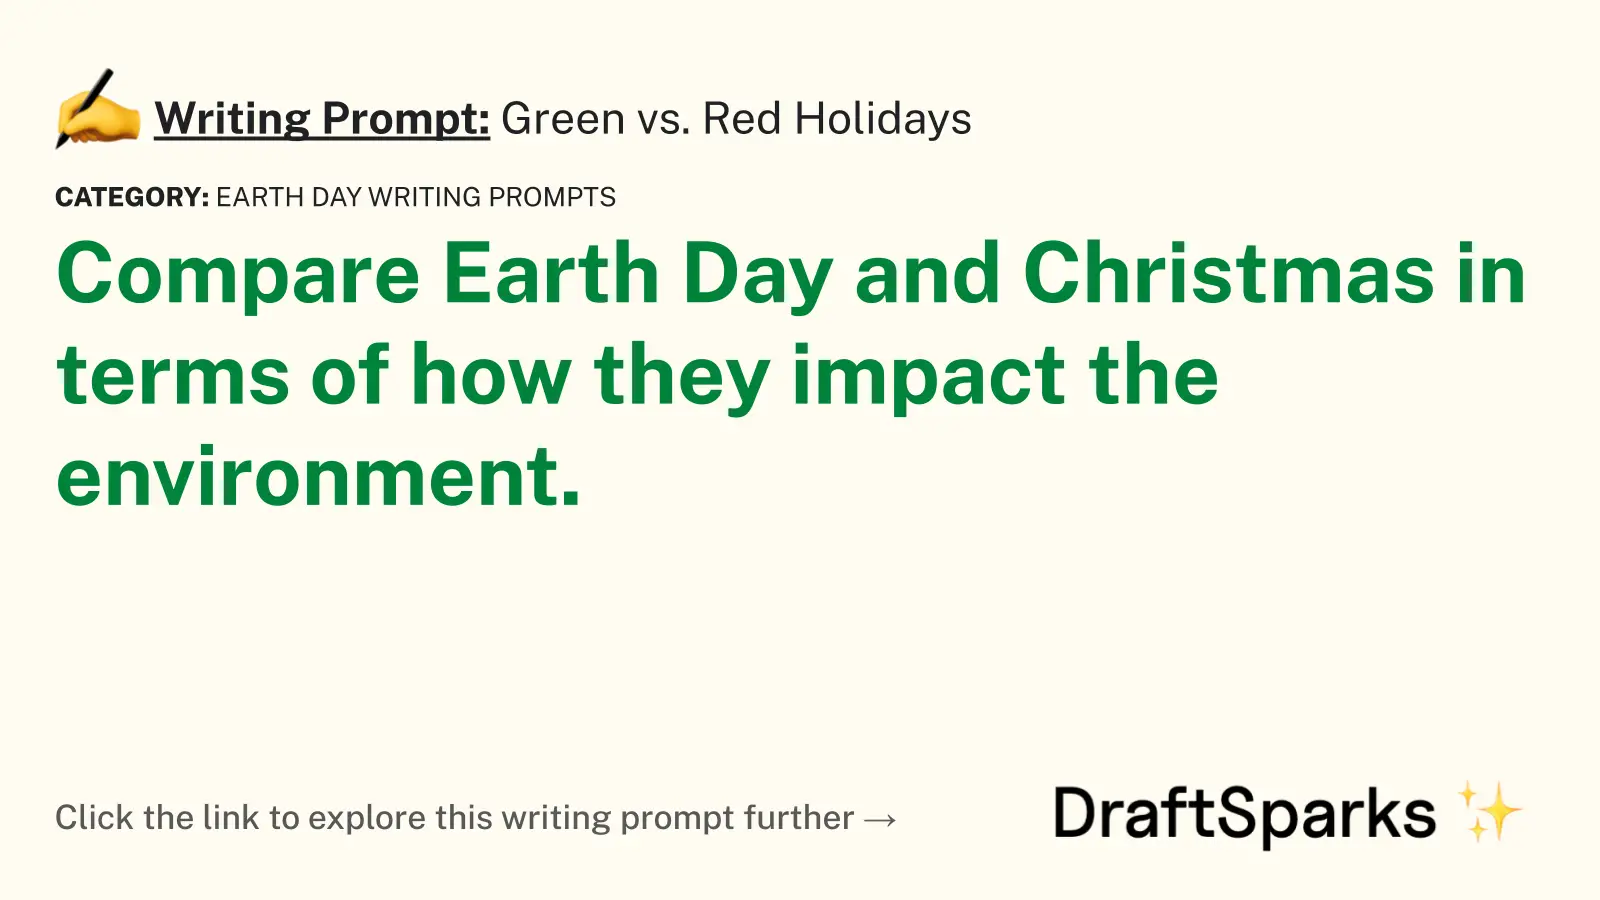 Green vs. Red Holidays